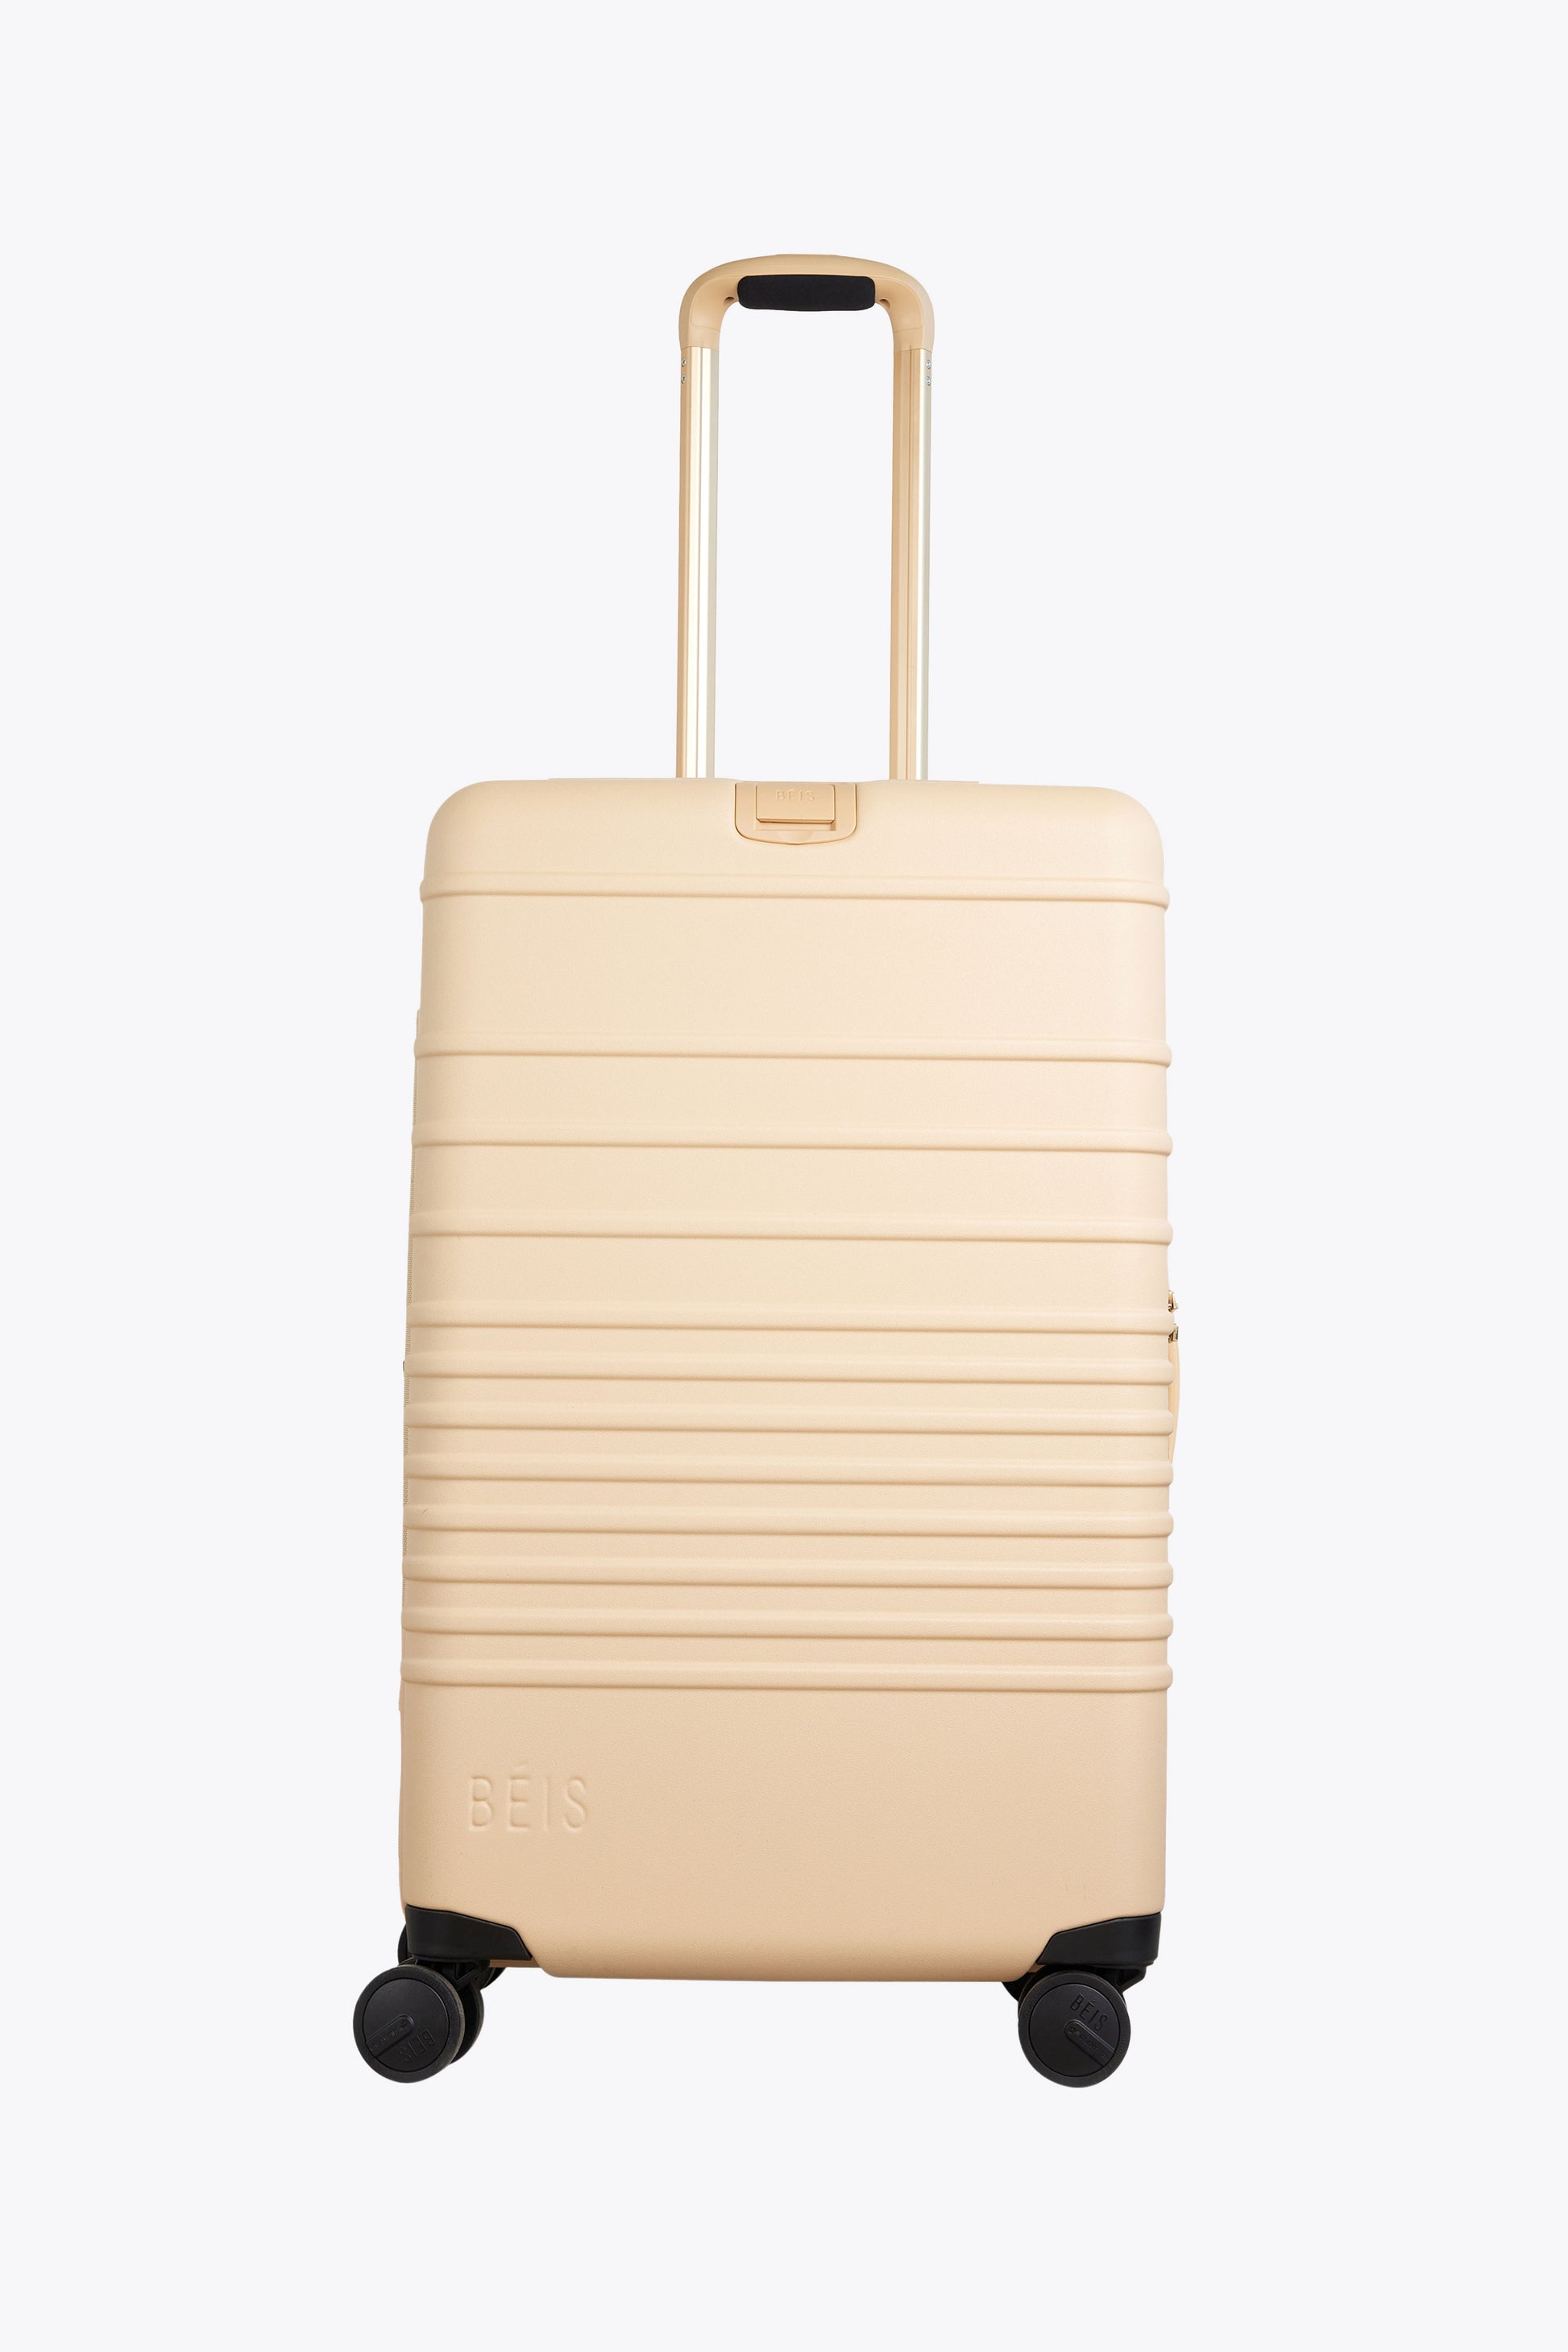 BÉIS 'The Medium Check-In Roller' in Beige - 26 Checked Baggage in Beige |  BÉIS Travel CA